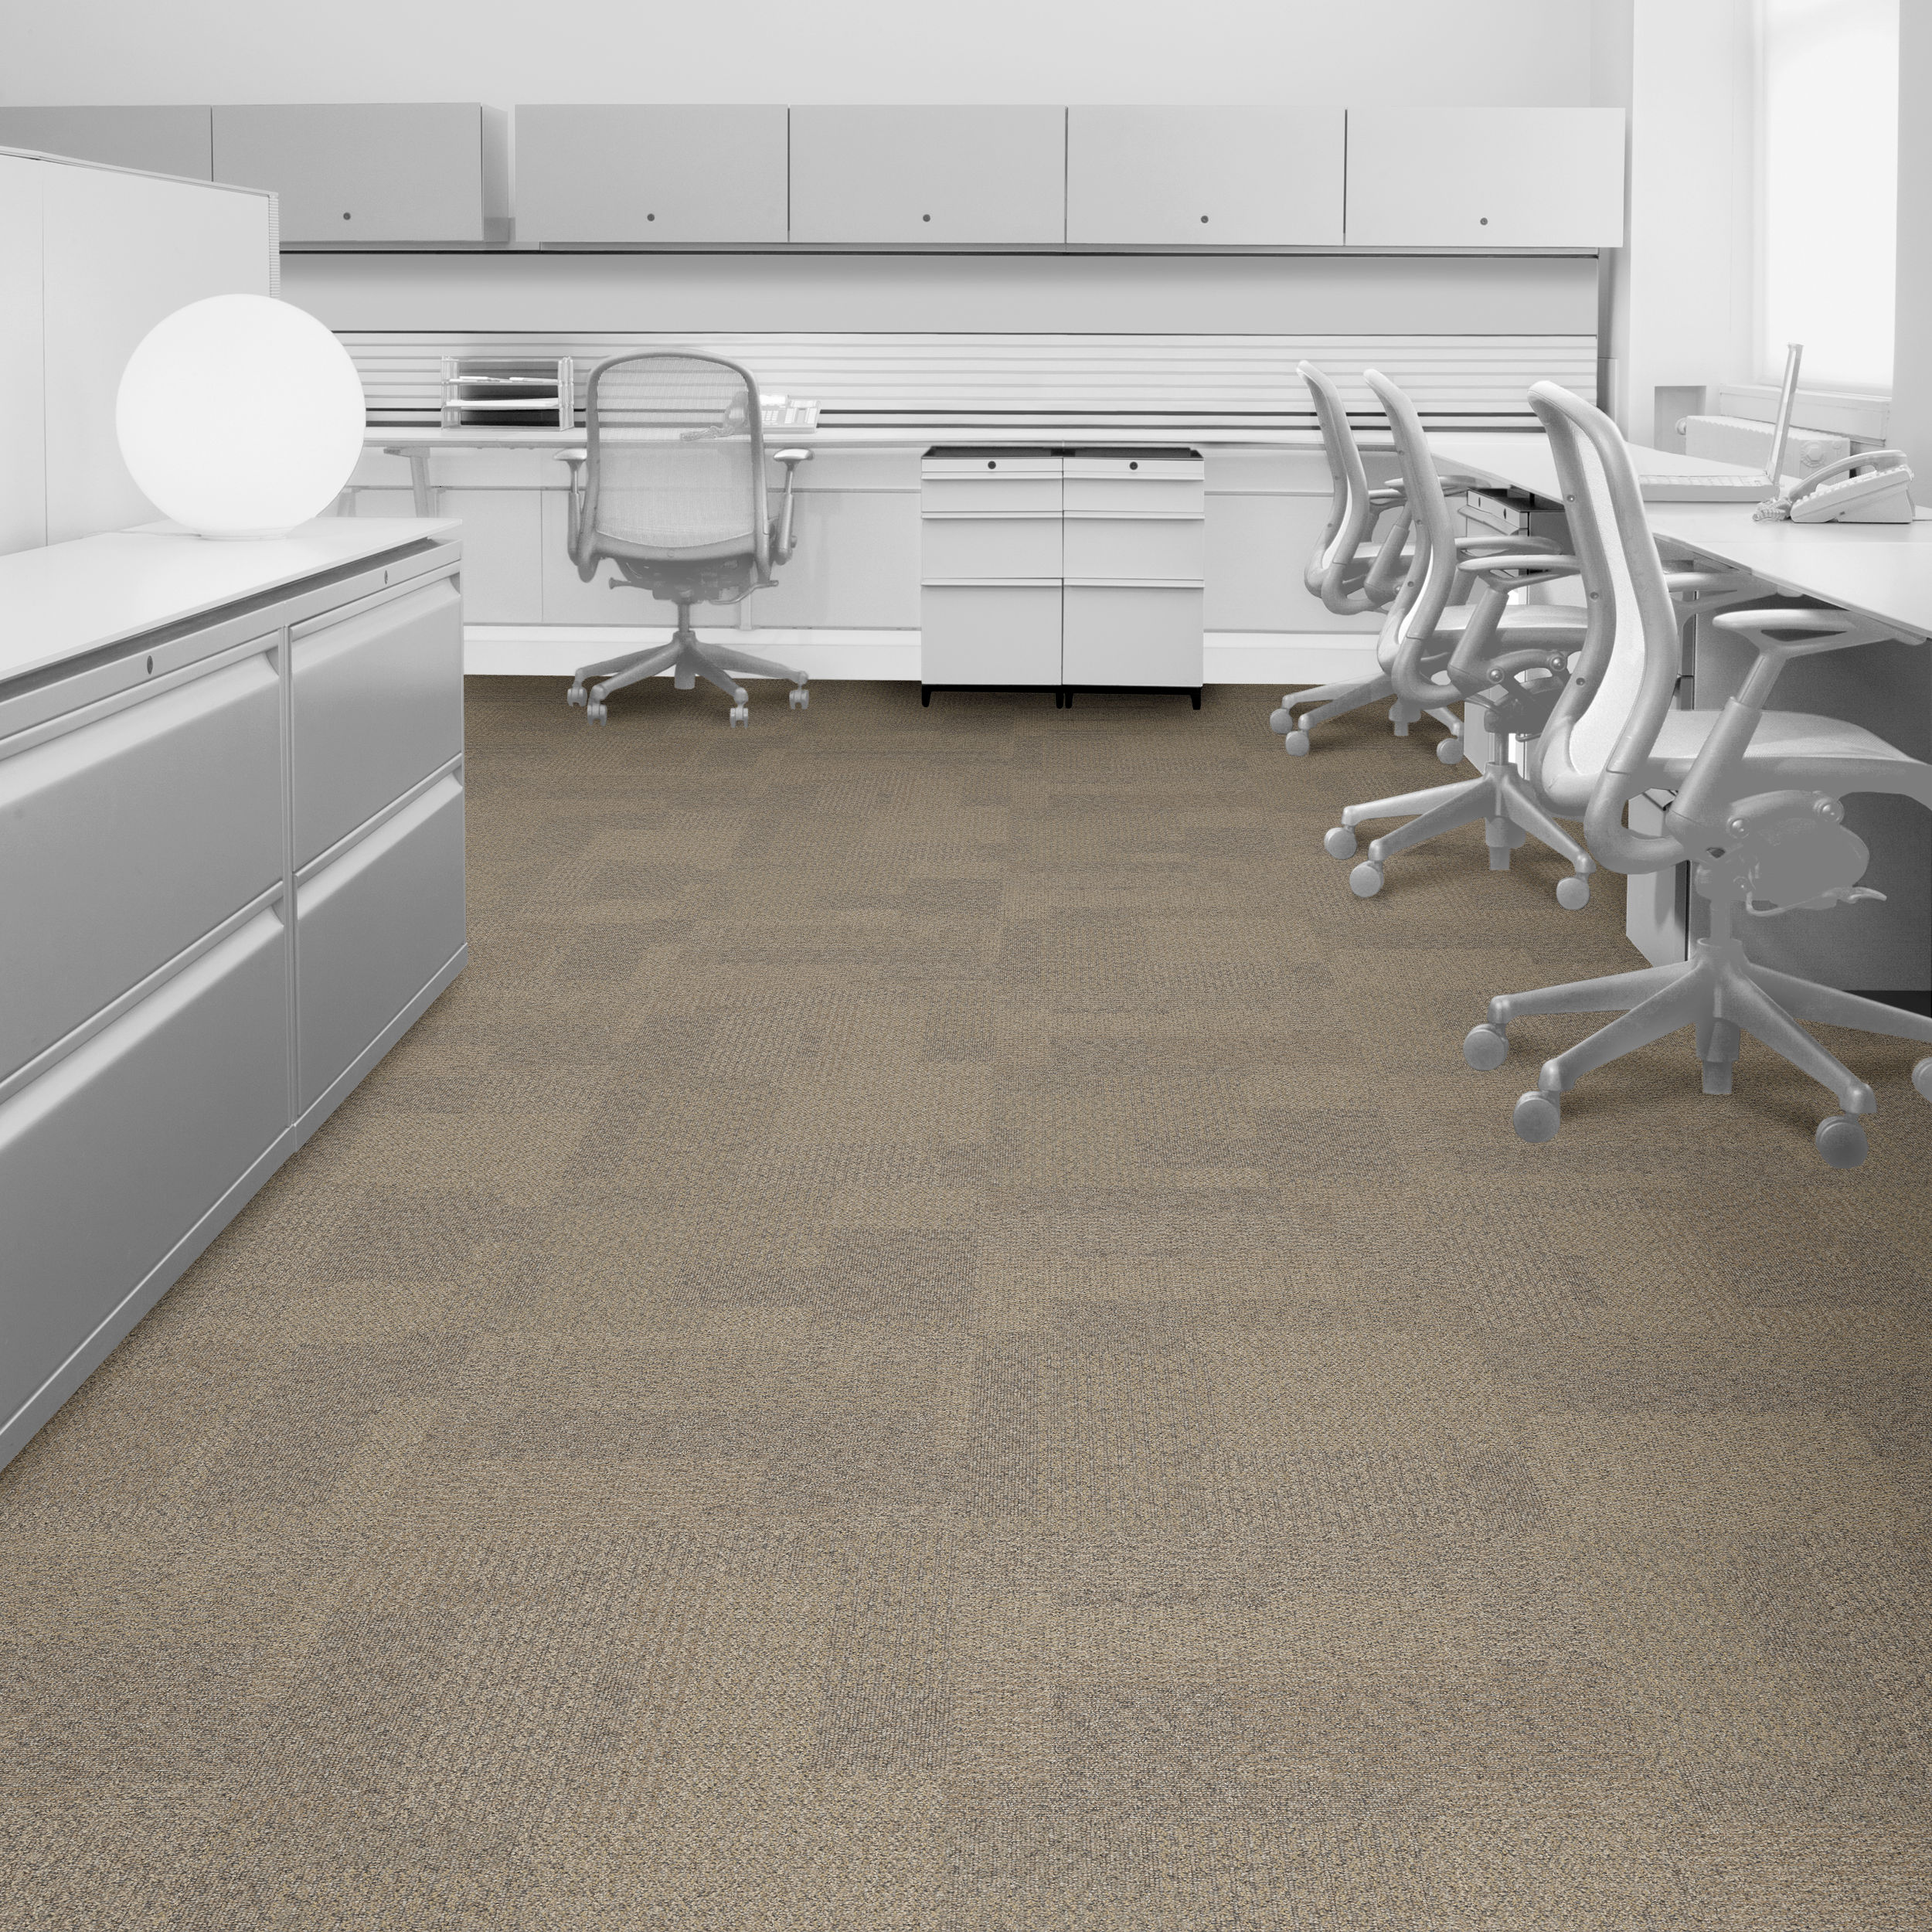 Meadow Transformation Carpet Tile in office setting.